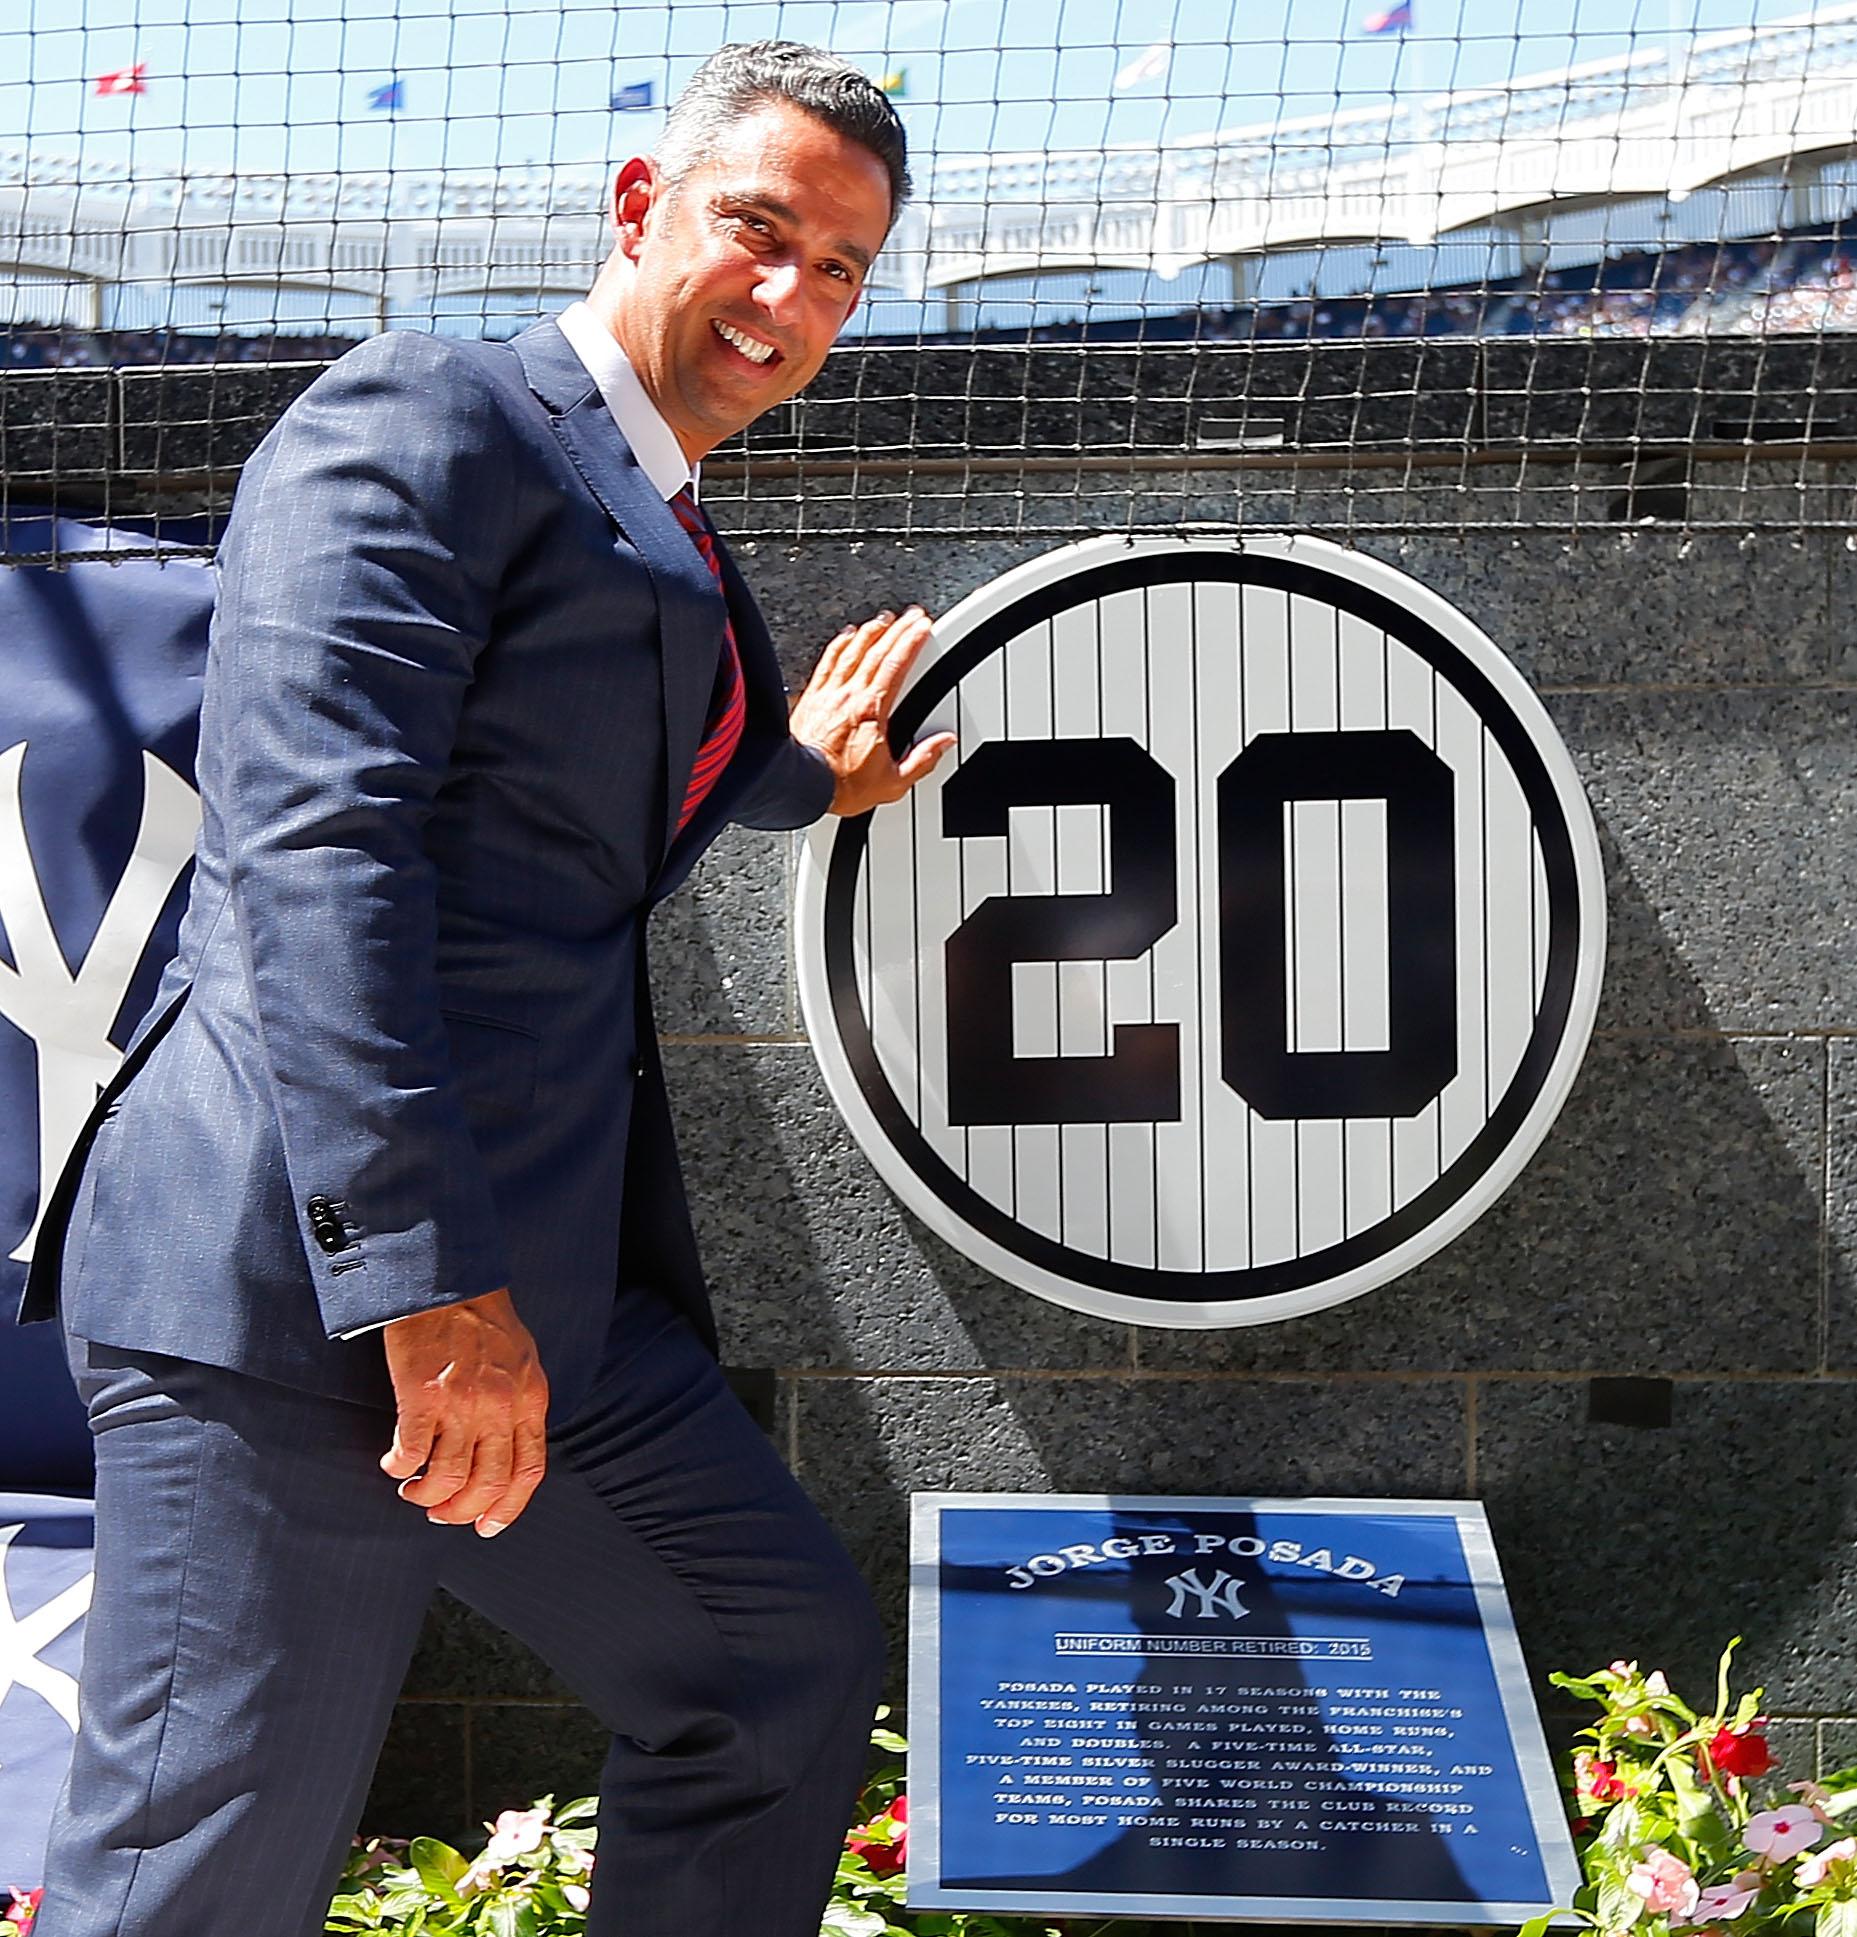 SportsCenter on X: Jorge Posada poses with his retired number